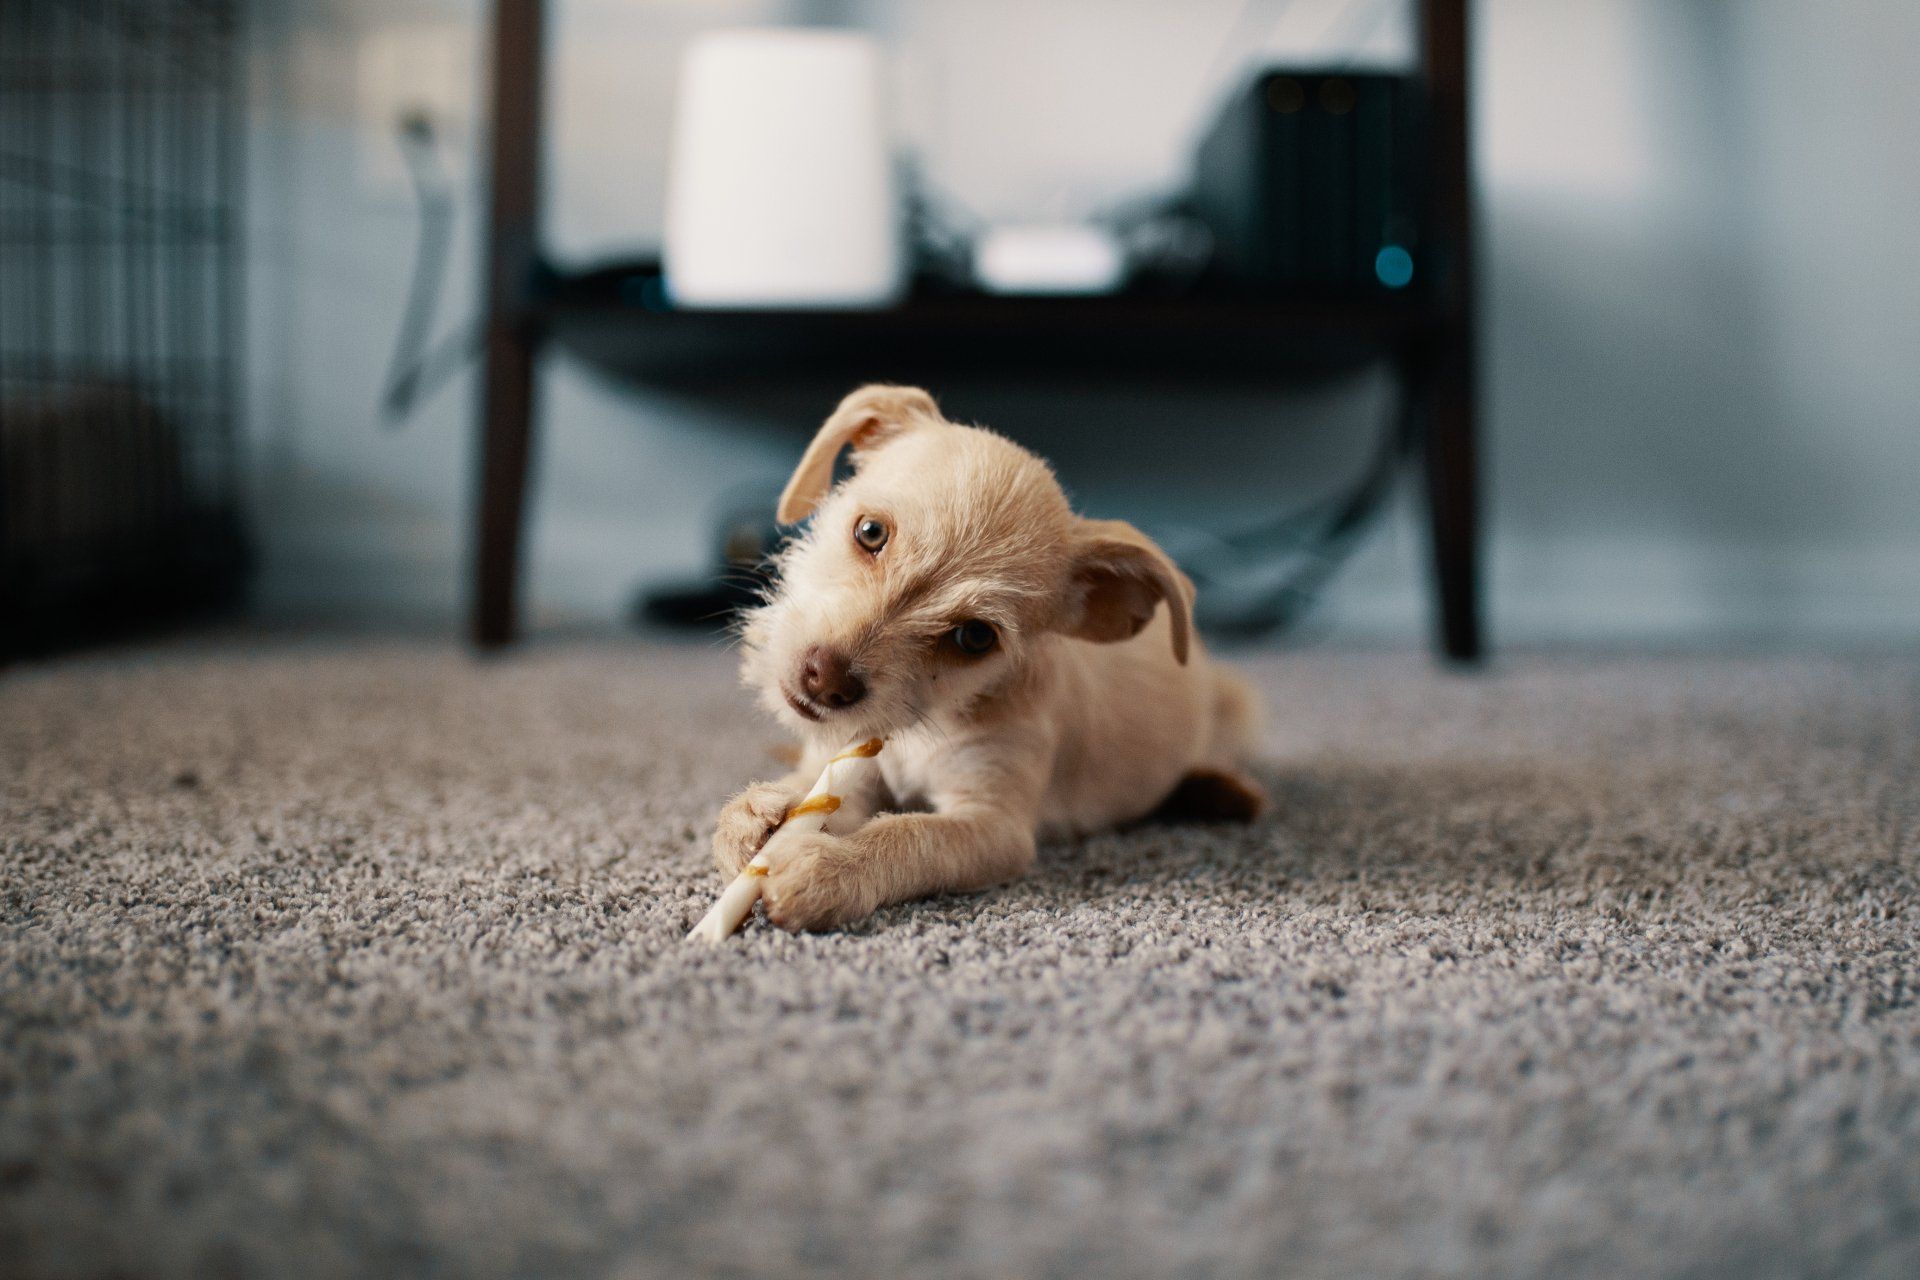 A small dog is laying on a carpet in a living room.